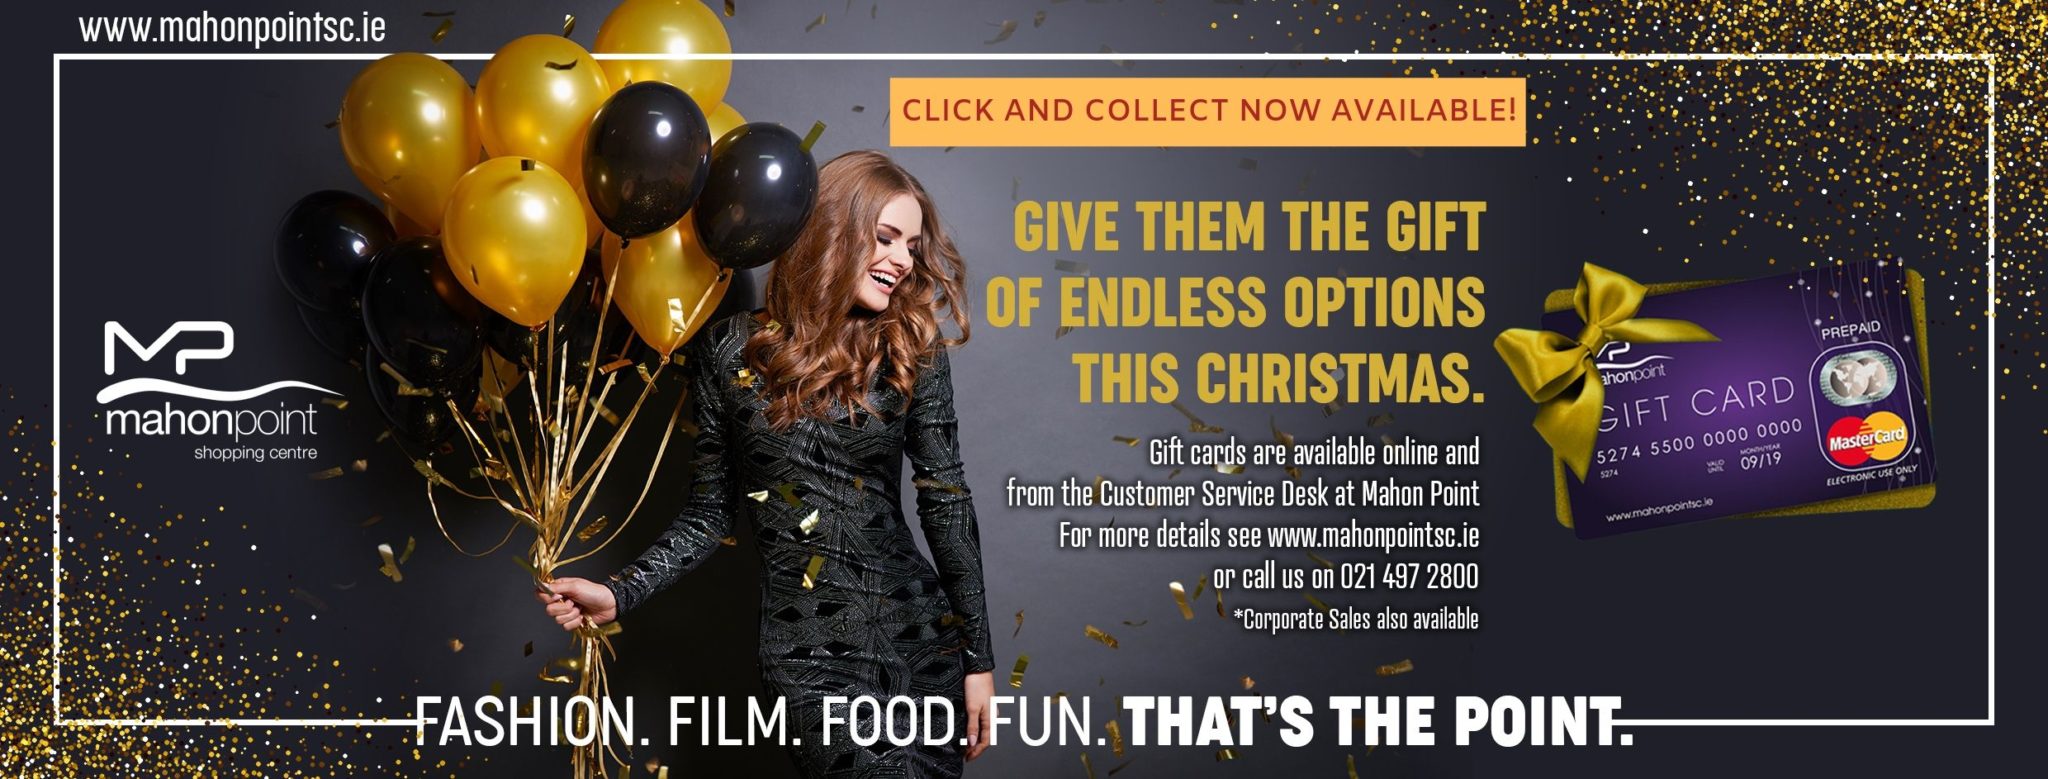 Christmas Click And Collect Now Available Mahon Point Shopping Centre If you place an order online, it will be ready and waiting for you the next day to use our click and collect service, simply select this option during the checkout at the delivery stage and select your desired store. mahon point shopping centre